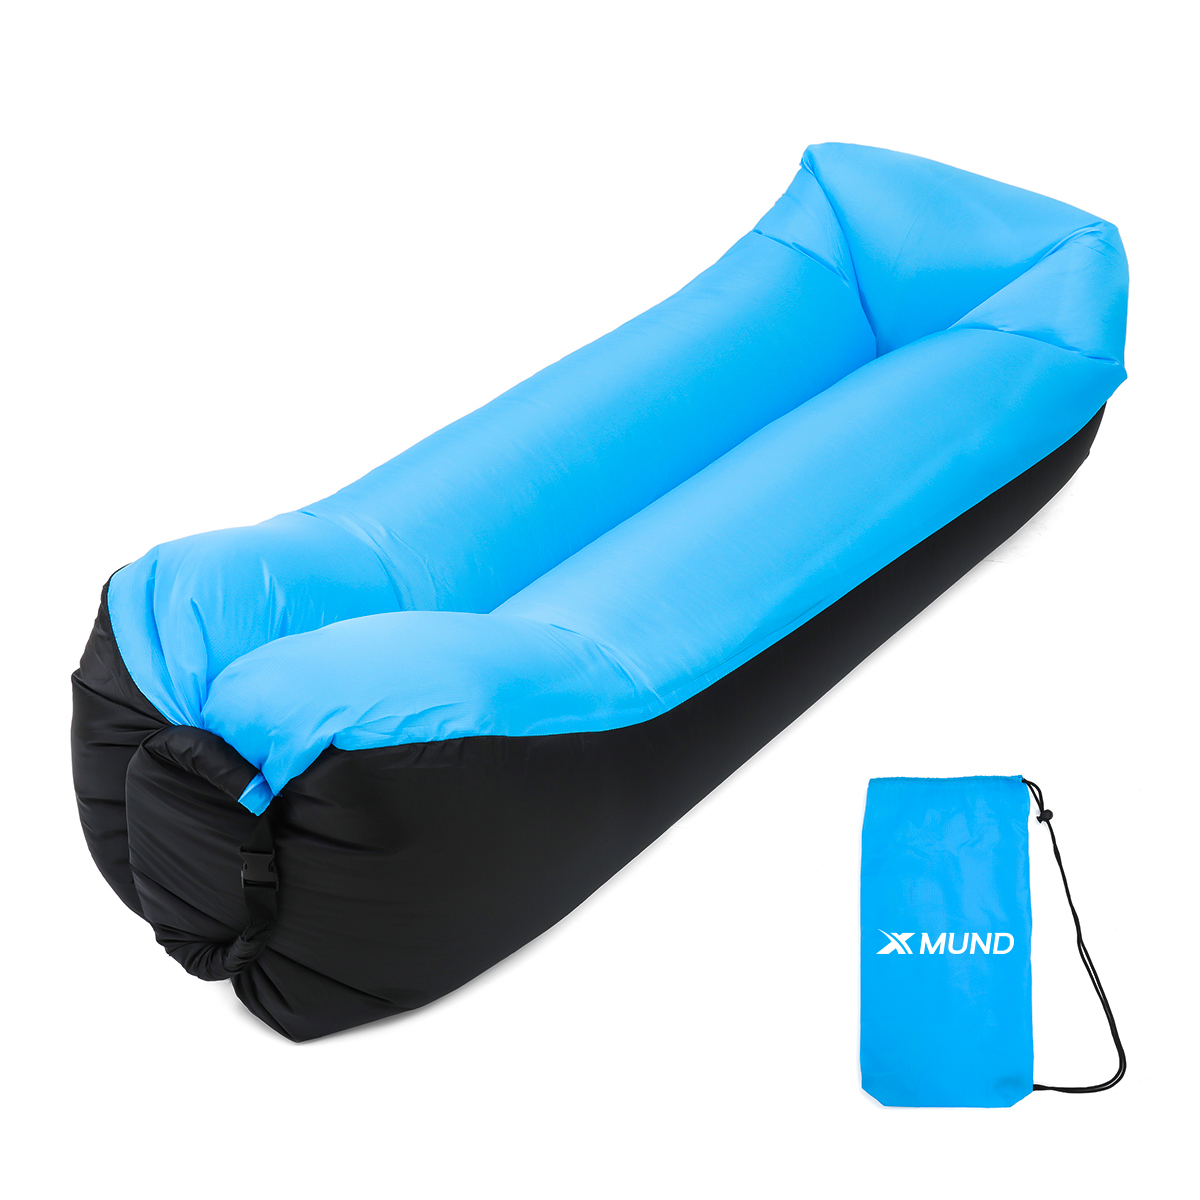 Xmund XD-IF1 210T Inflatable Sofa Camping Travel Air Lazy Sofa Sleeping Sand Beach Lay Bag Couch 9